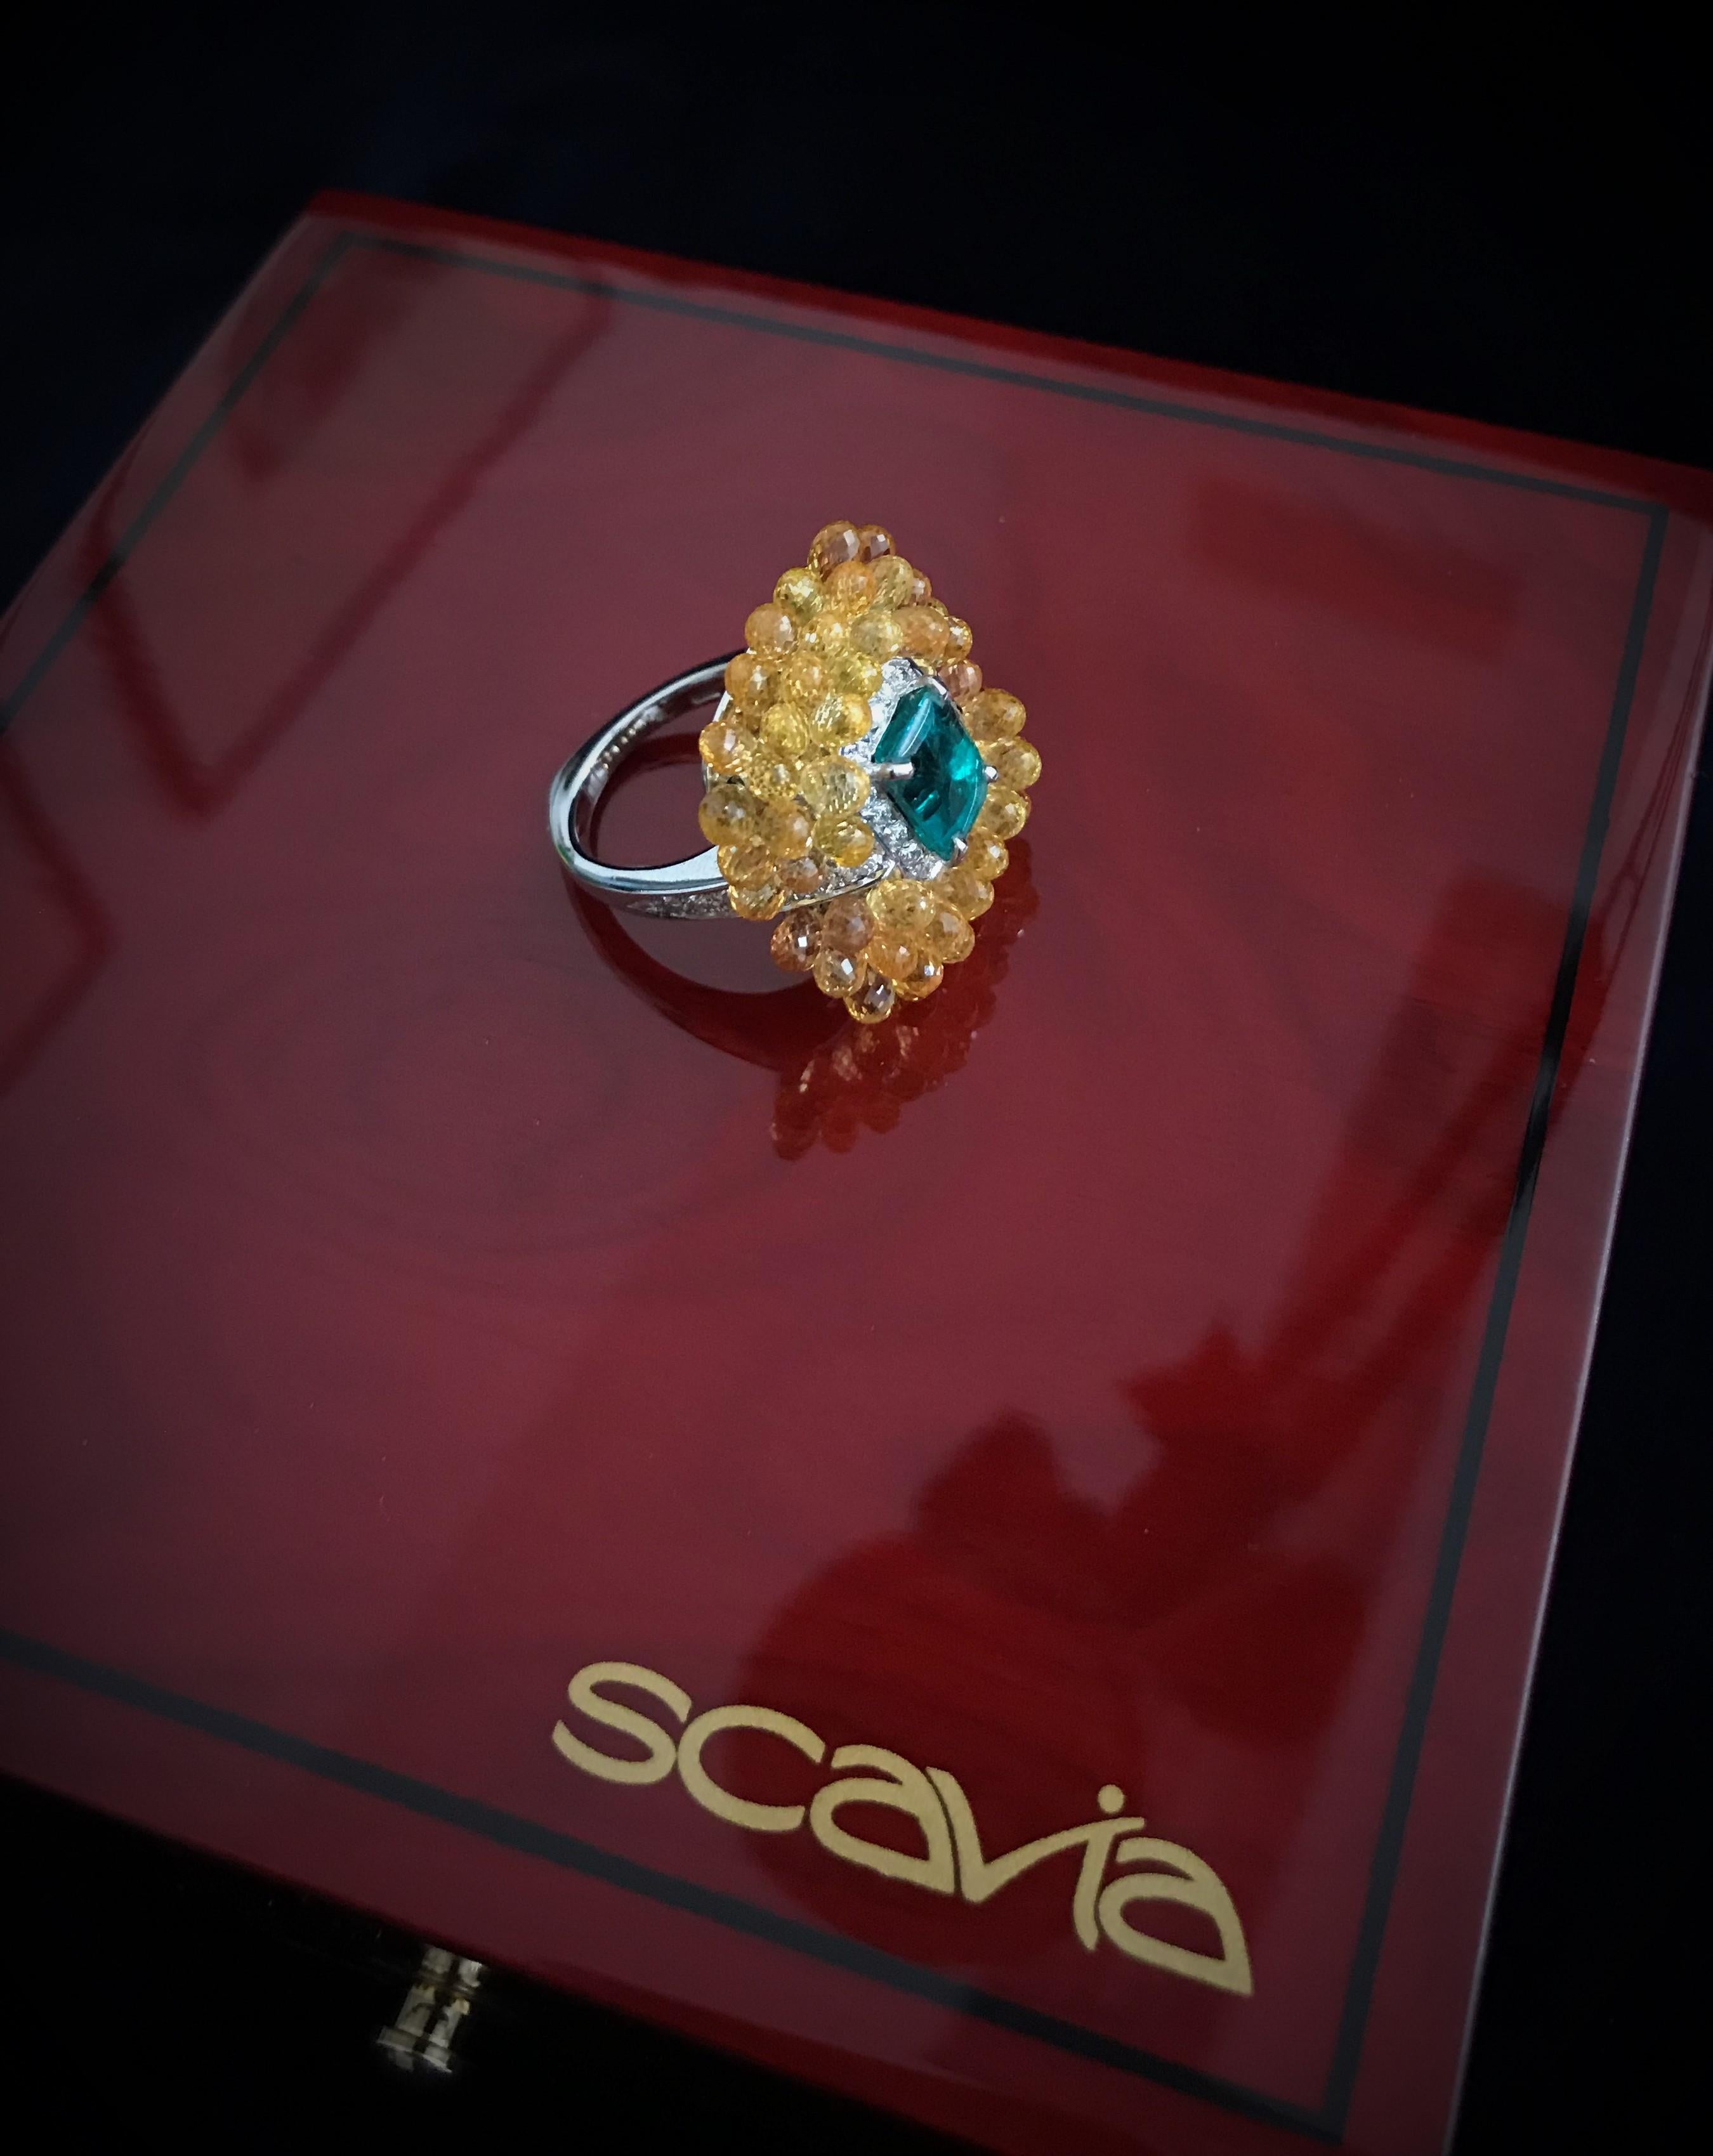 Diamond Cocktail Ring 2.09 Ct Cut Emerald and Briolette Cut Yellow Sapphires For Sale 2